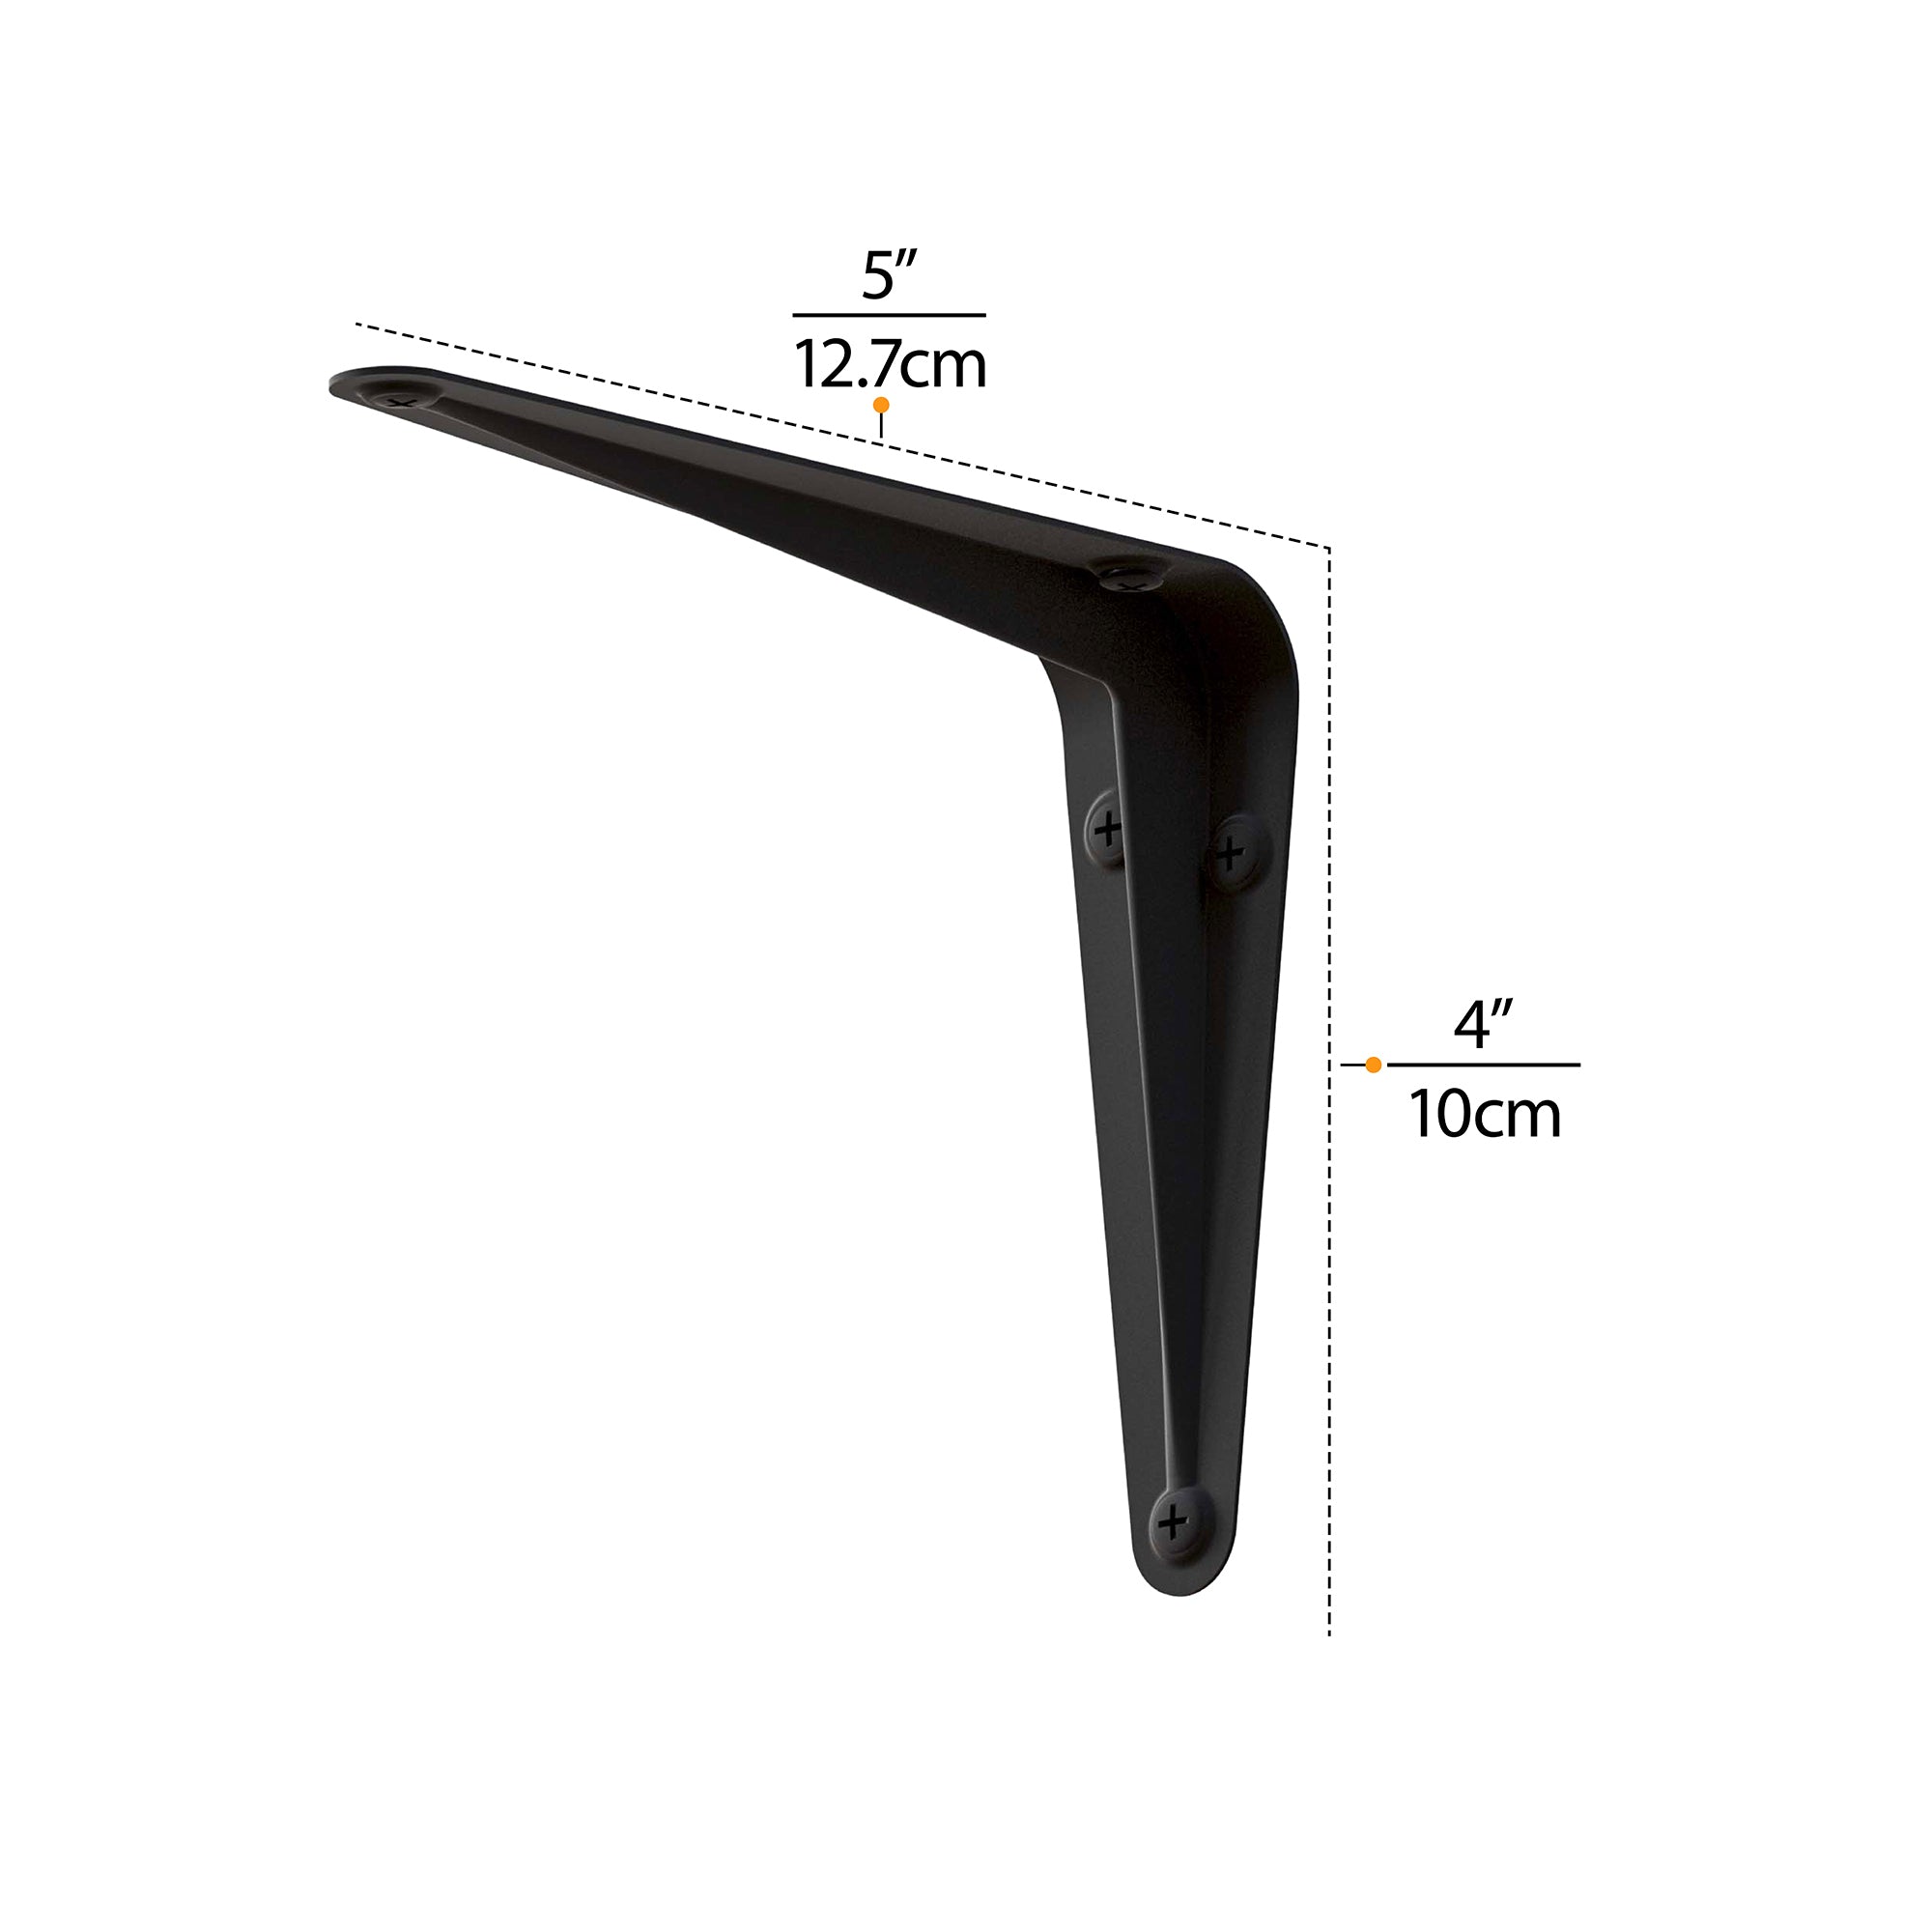 Black metal heavy duty shelf bracket with dimensions 5"x4", perfect for DIY shelving projects.